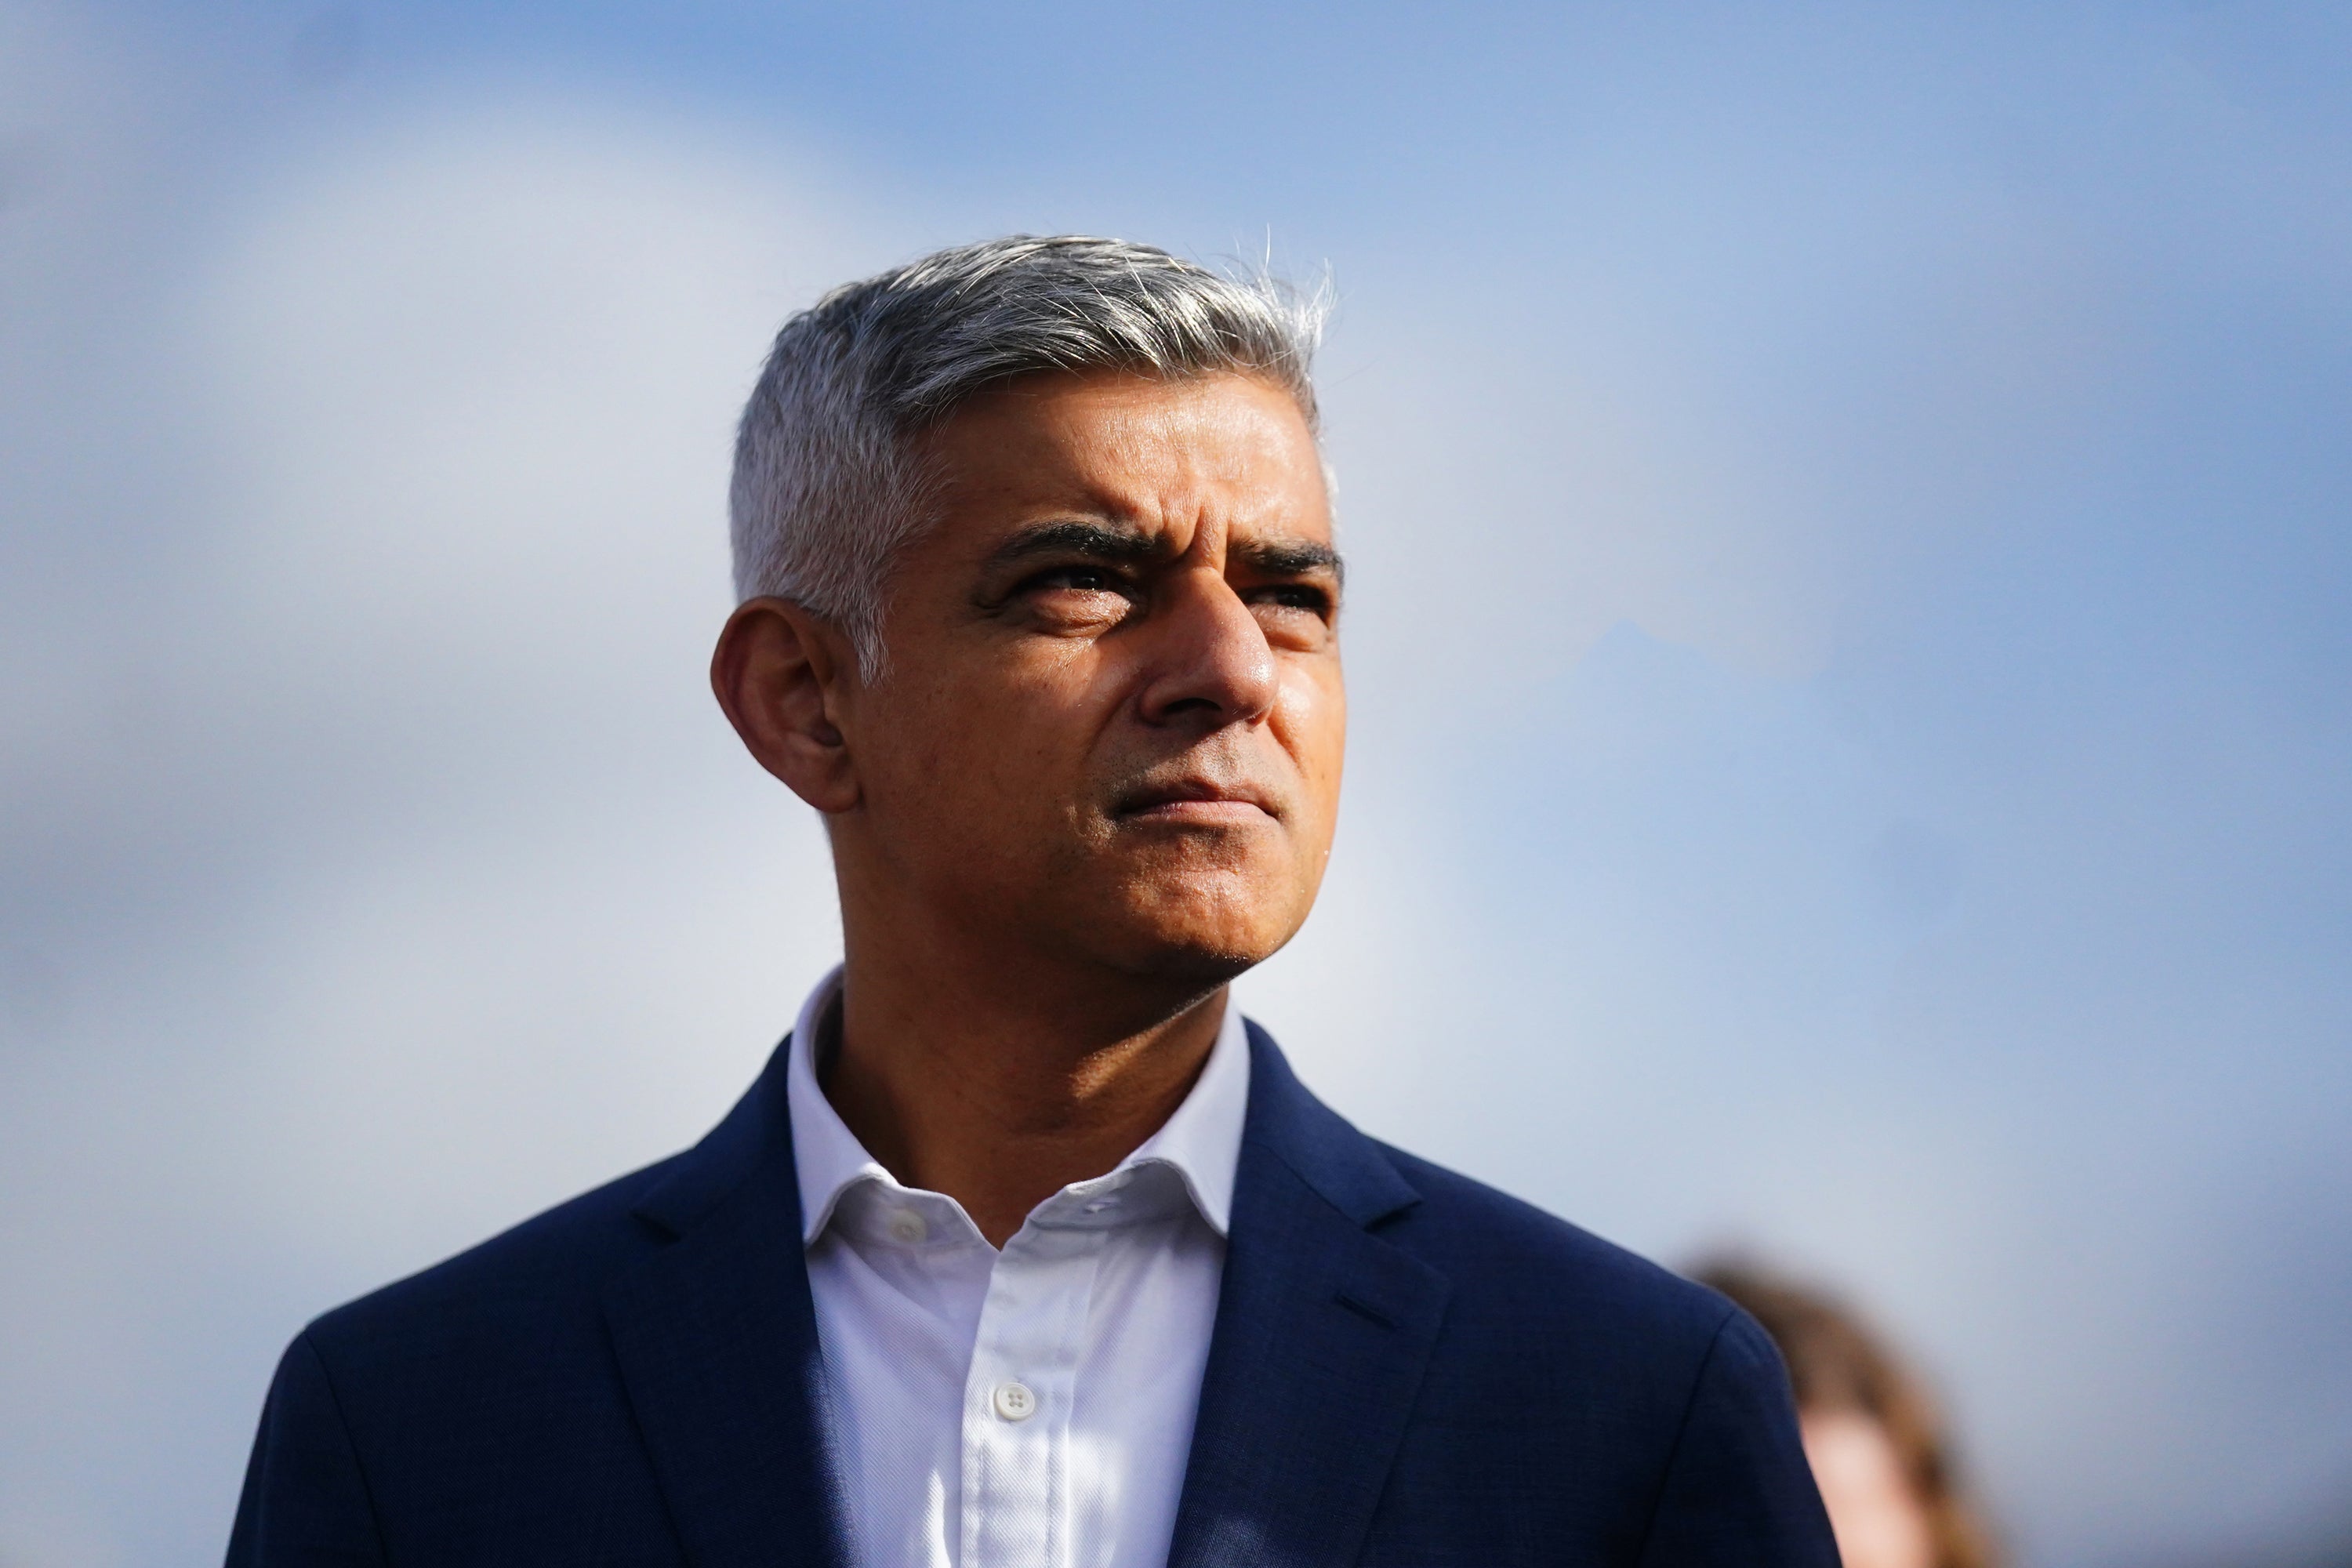 Mayor of London Sadiq Khan said he was “disappointed” in West Ham manager David Moyes (PA/ Victoria Jones)